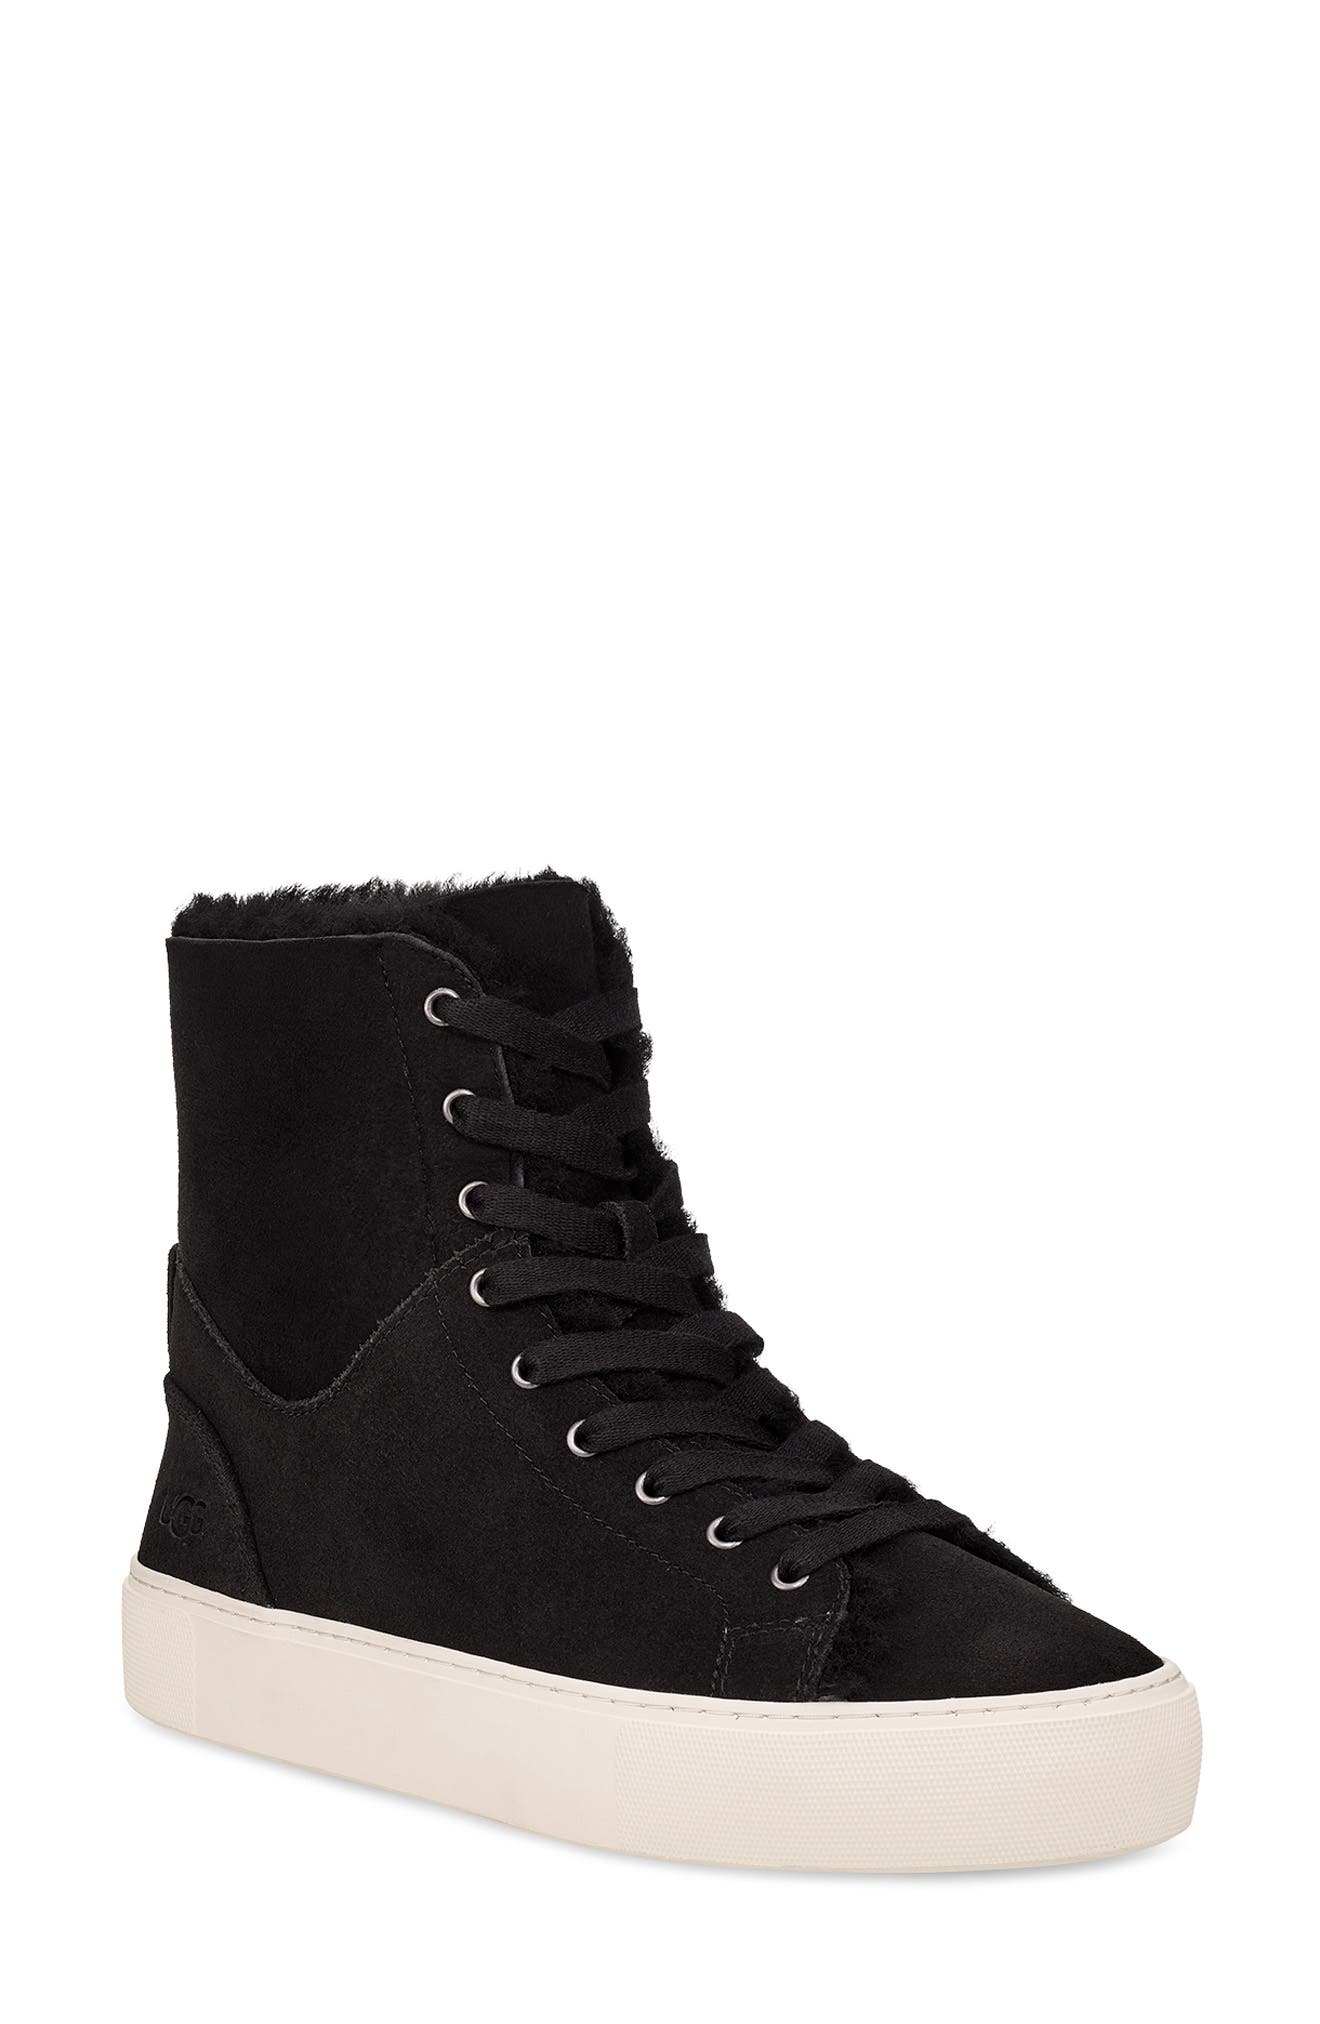 ugg shoes for womens sneaker